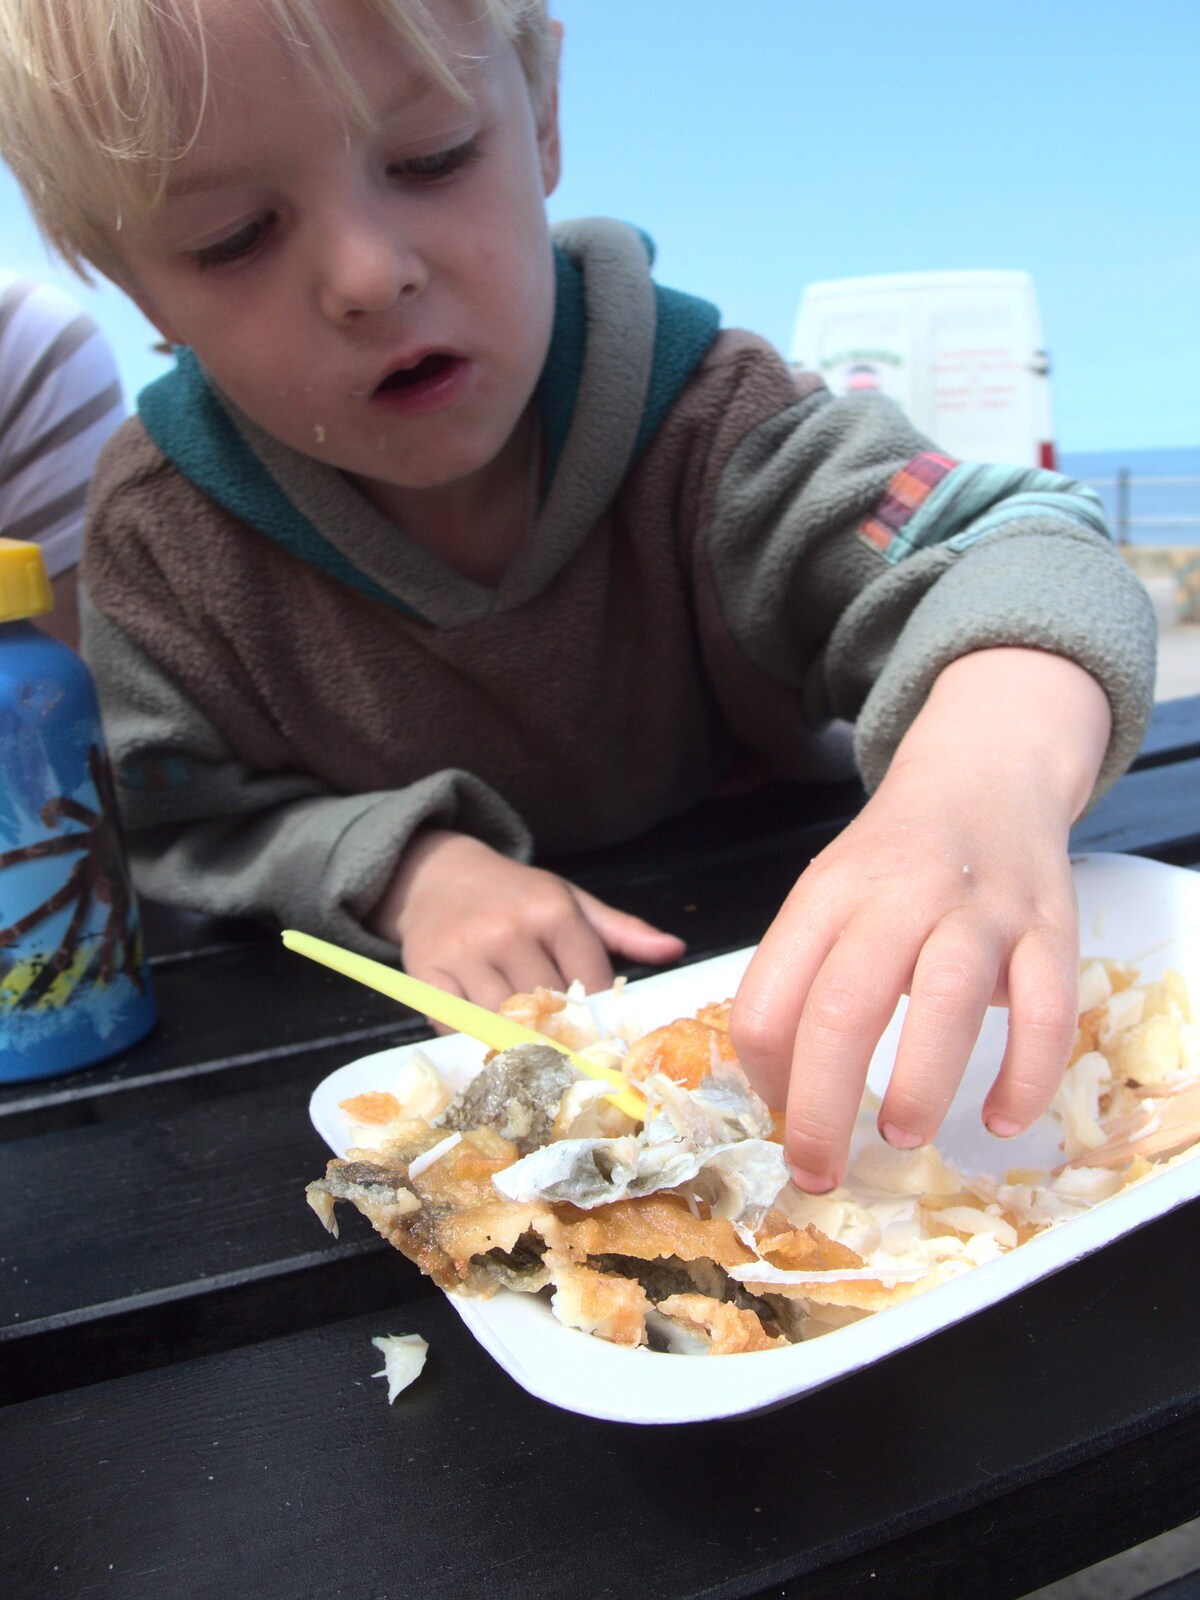 Harry eats some fish from A Birthday Camping Trip, East Runton, North Norfolk - 26th May 2015